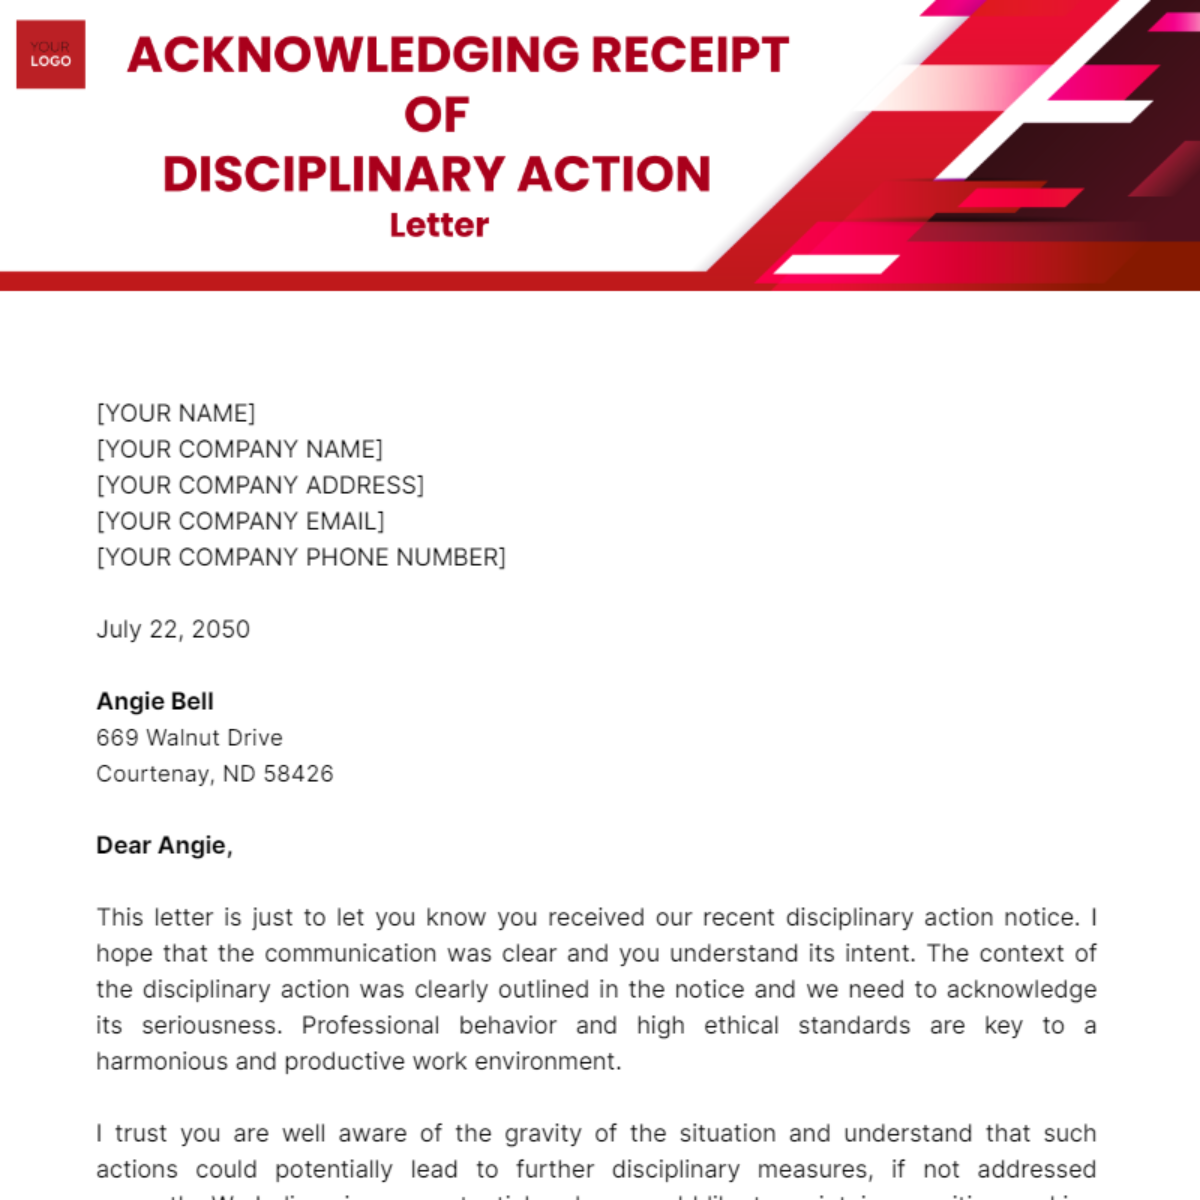 Acknowledging Receipt of Disciplinary Action Letter Template